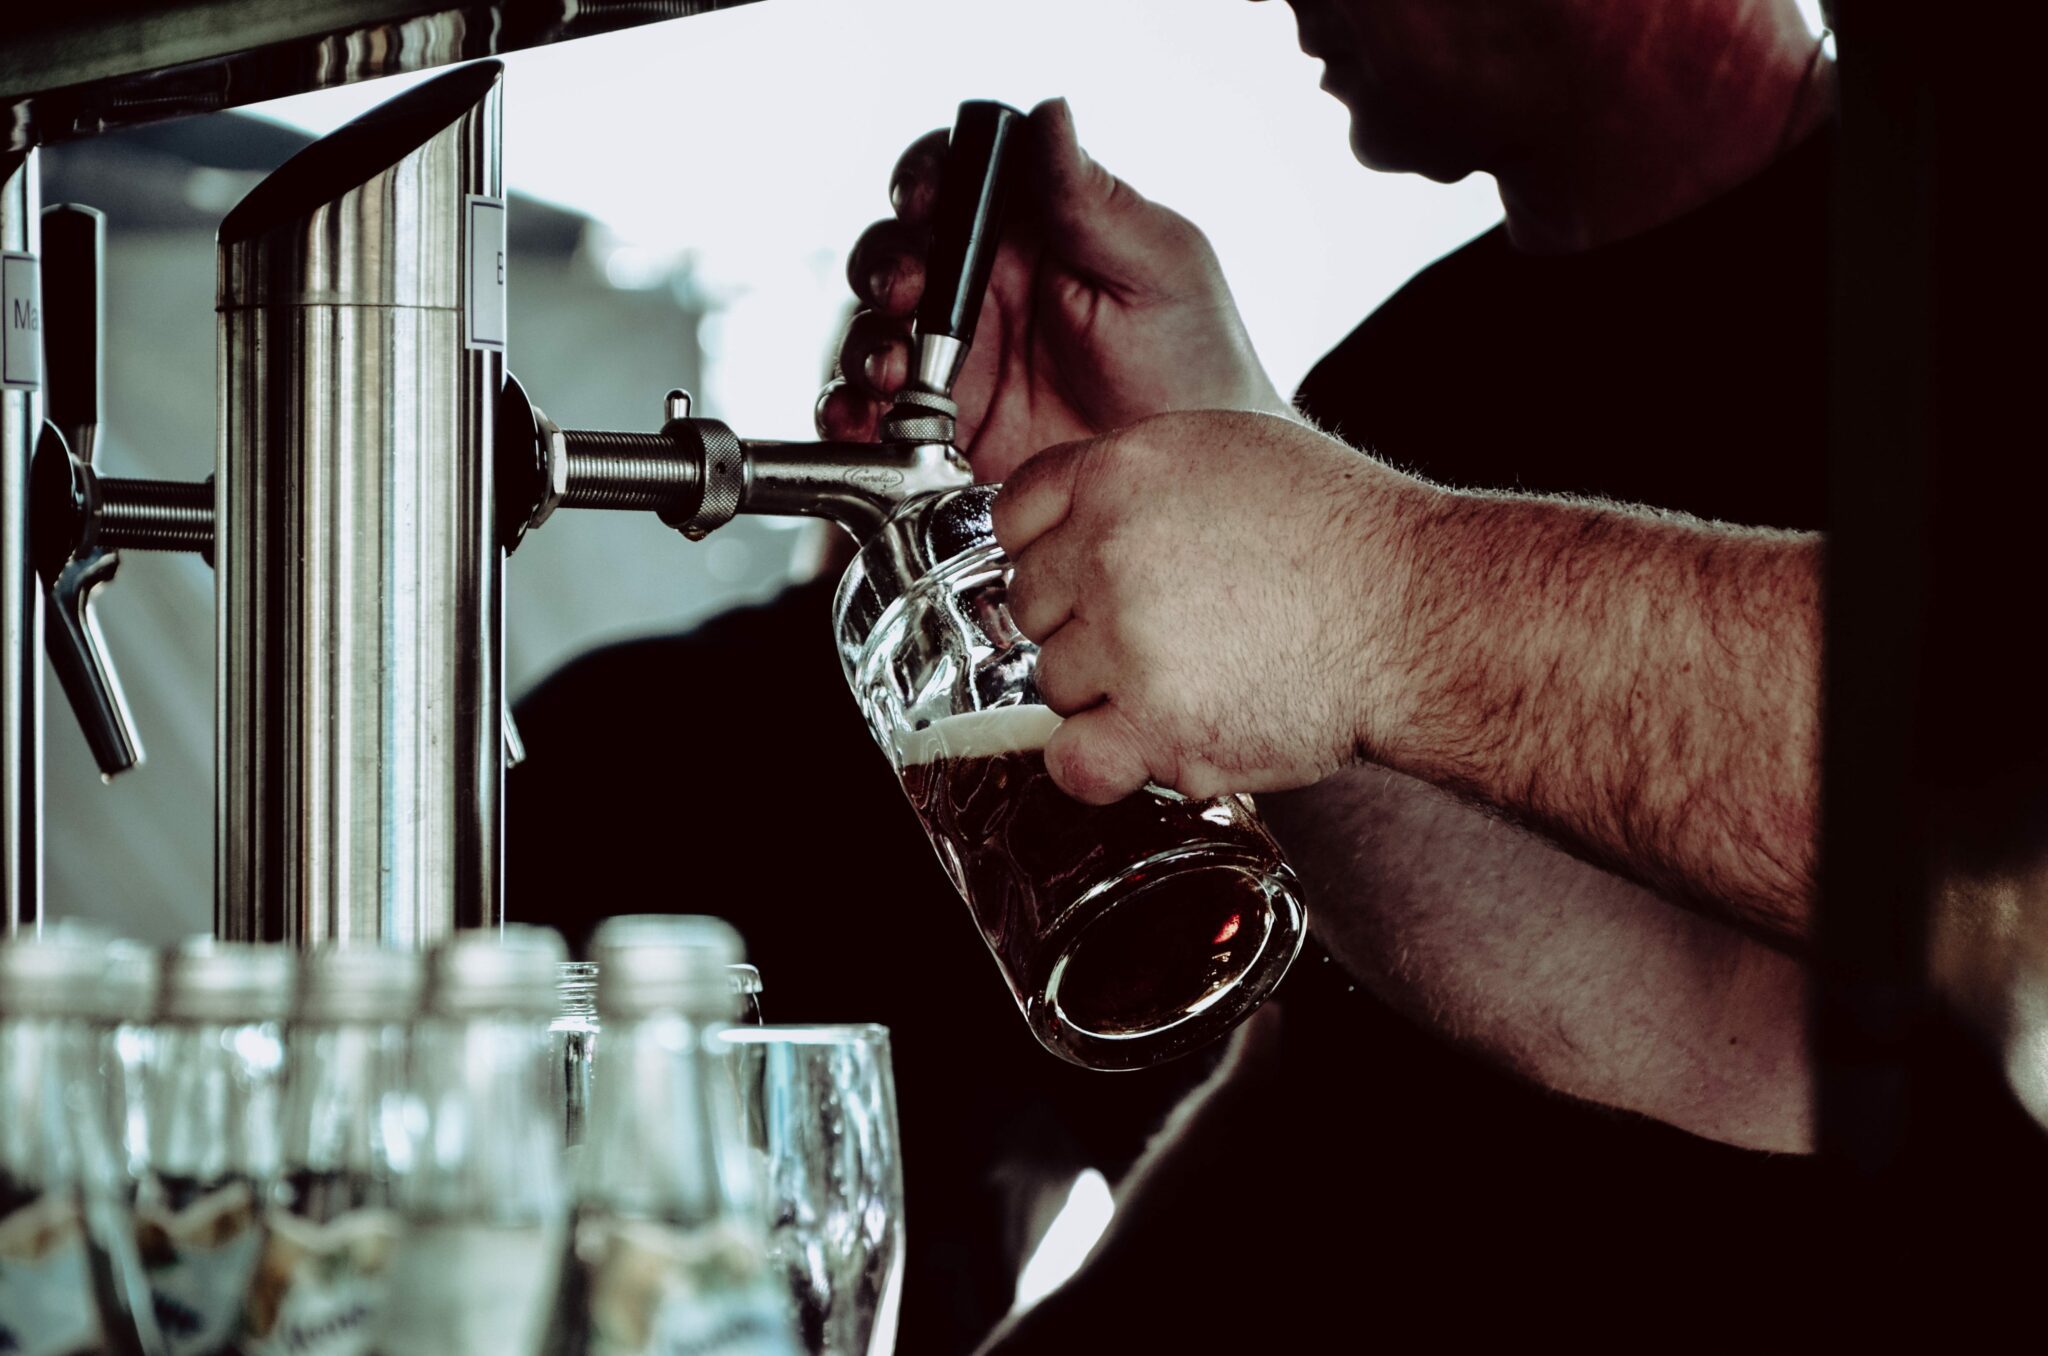 Image of hands pulling a pint into a glass